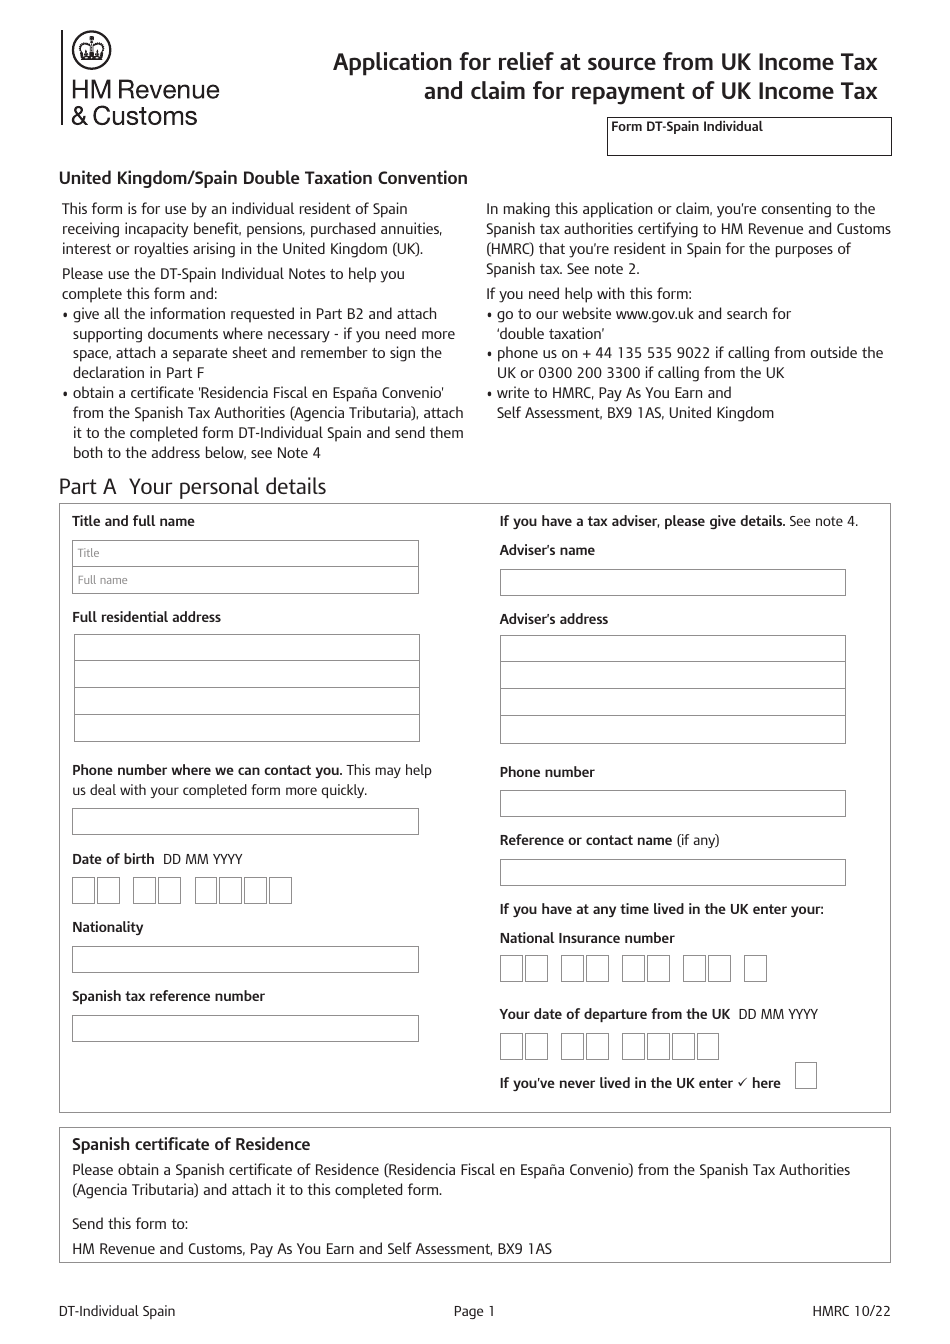 Form DT-INDIVIDUAL SPAIN Application for Relief at Source From UK Income Tax and Claim for Repayment of UK Income Tax - United Kingdom, Page 1